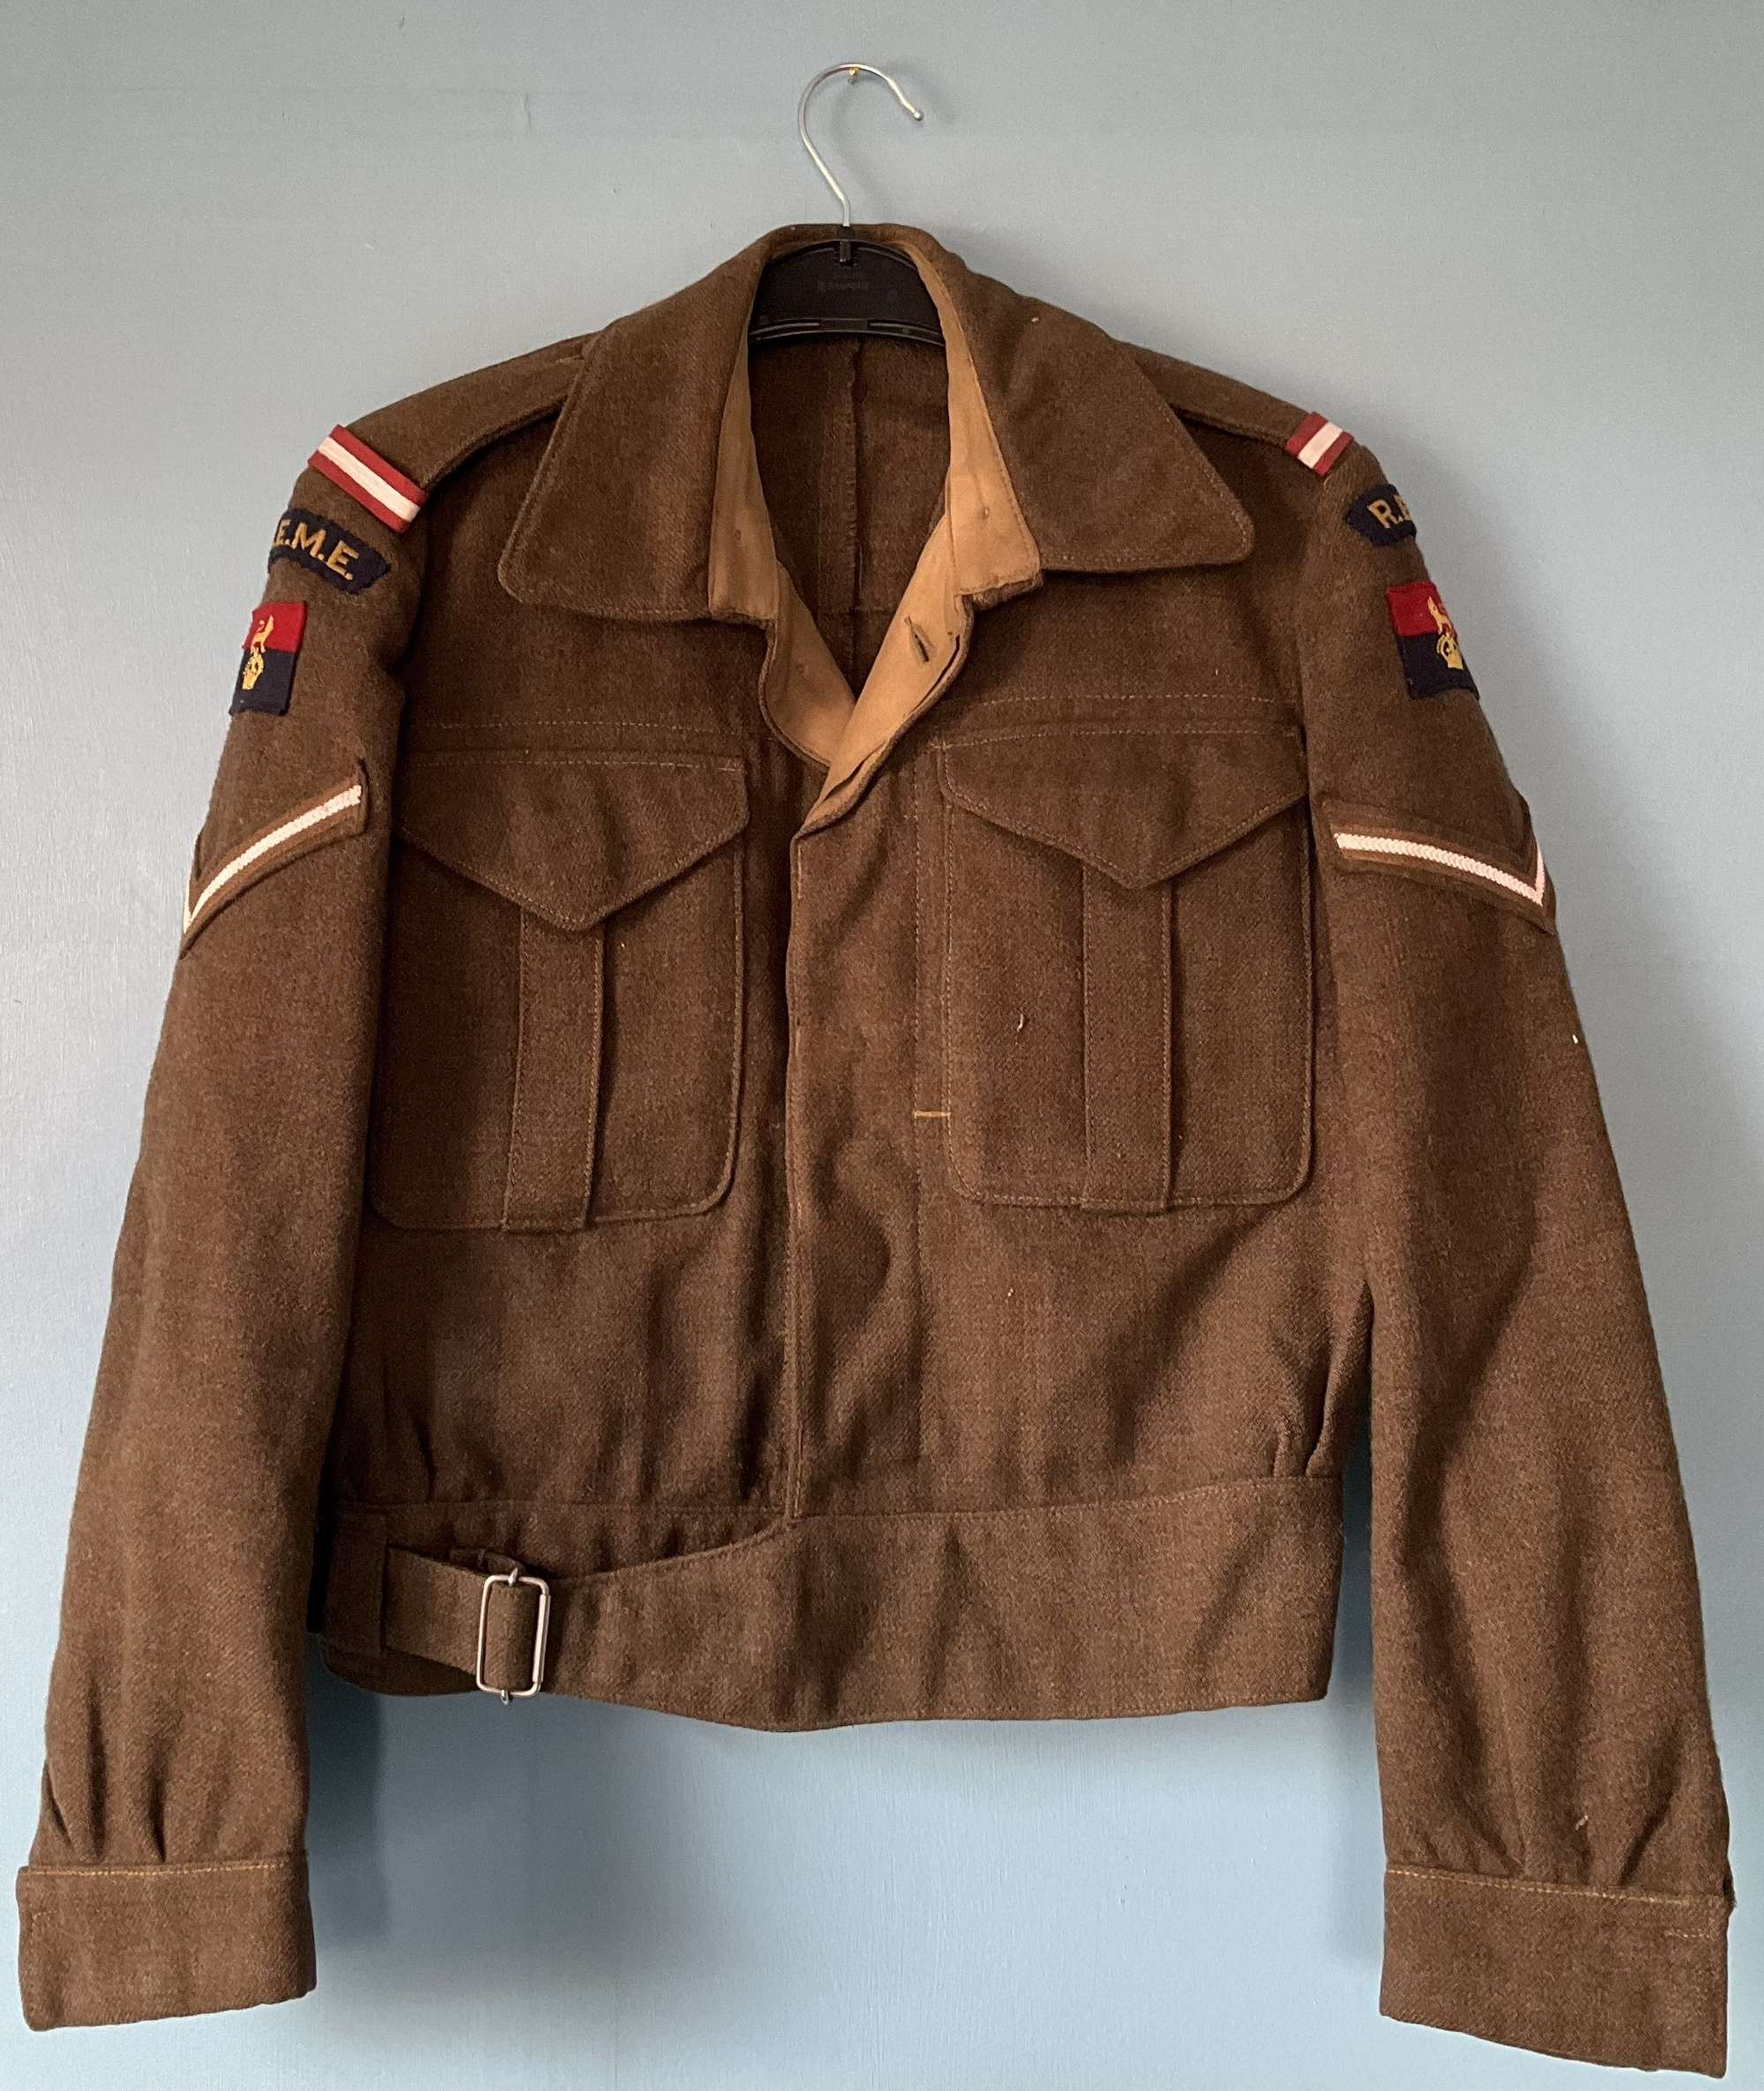 Attributed REME BD Jacket